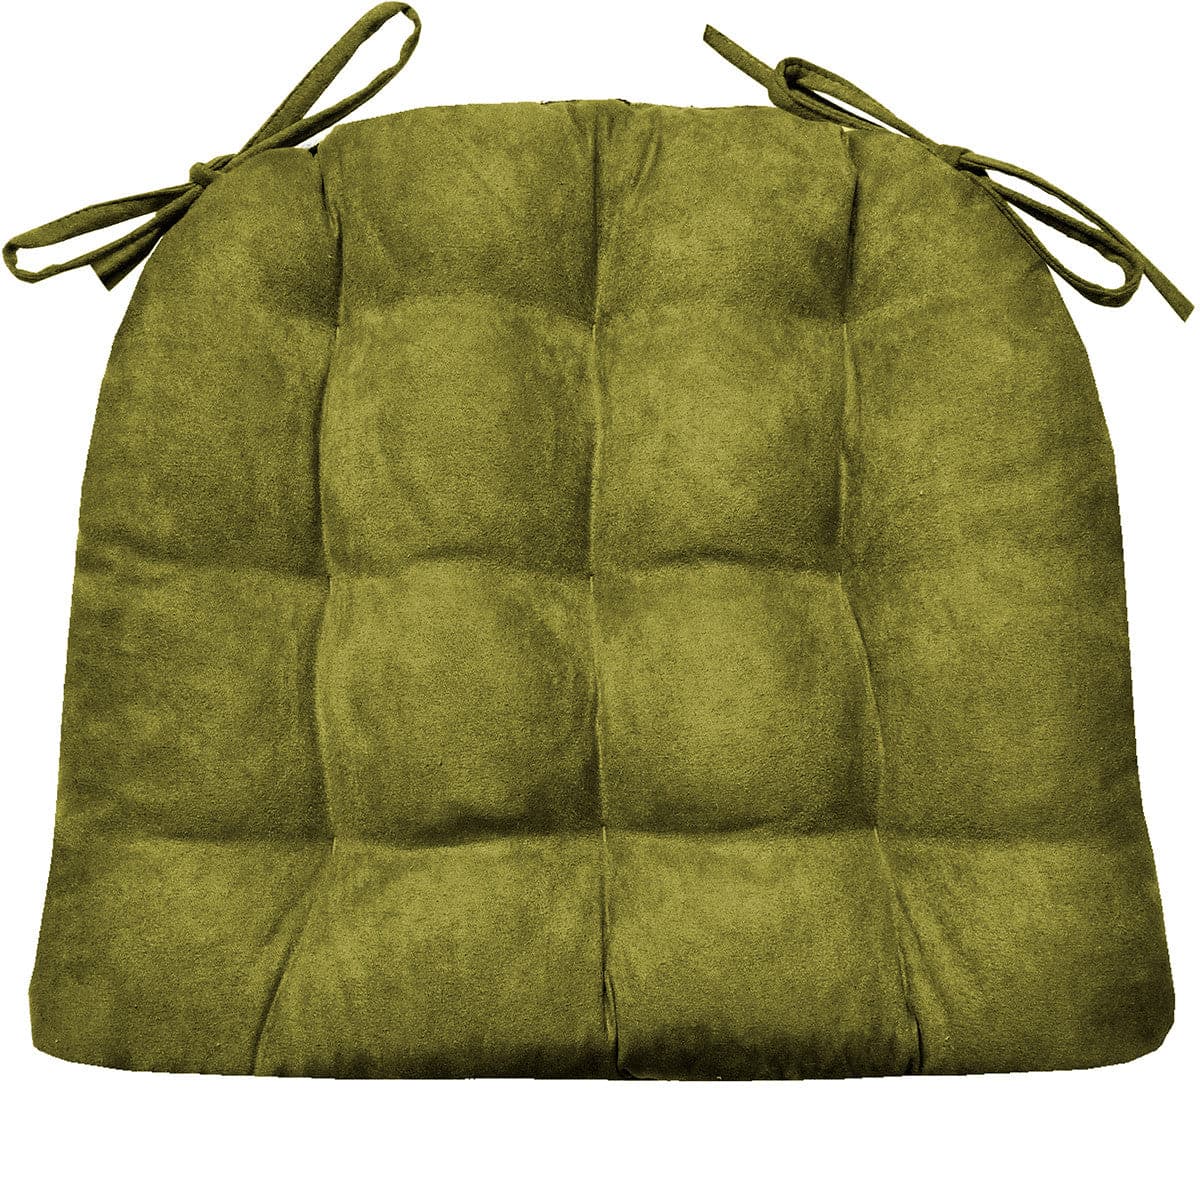 Soft Green Kitchen Dining Chair Cushion Pads